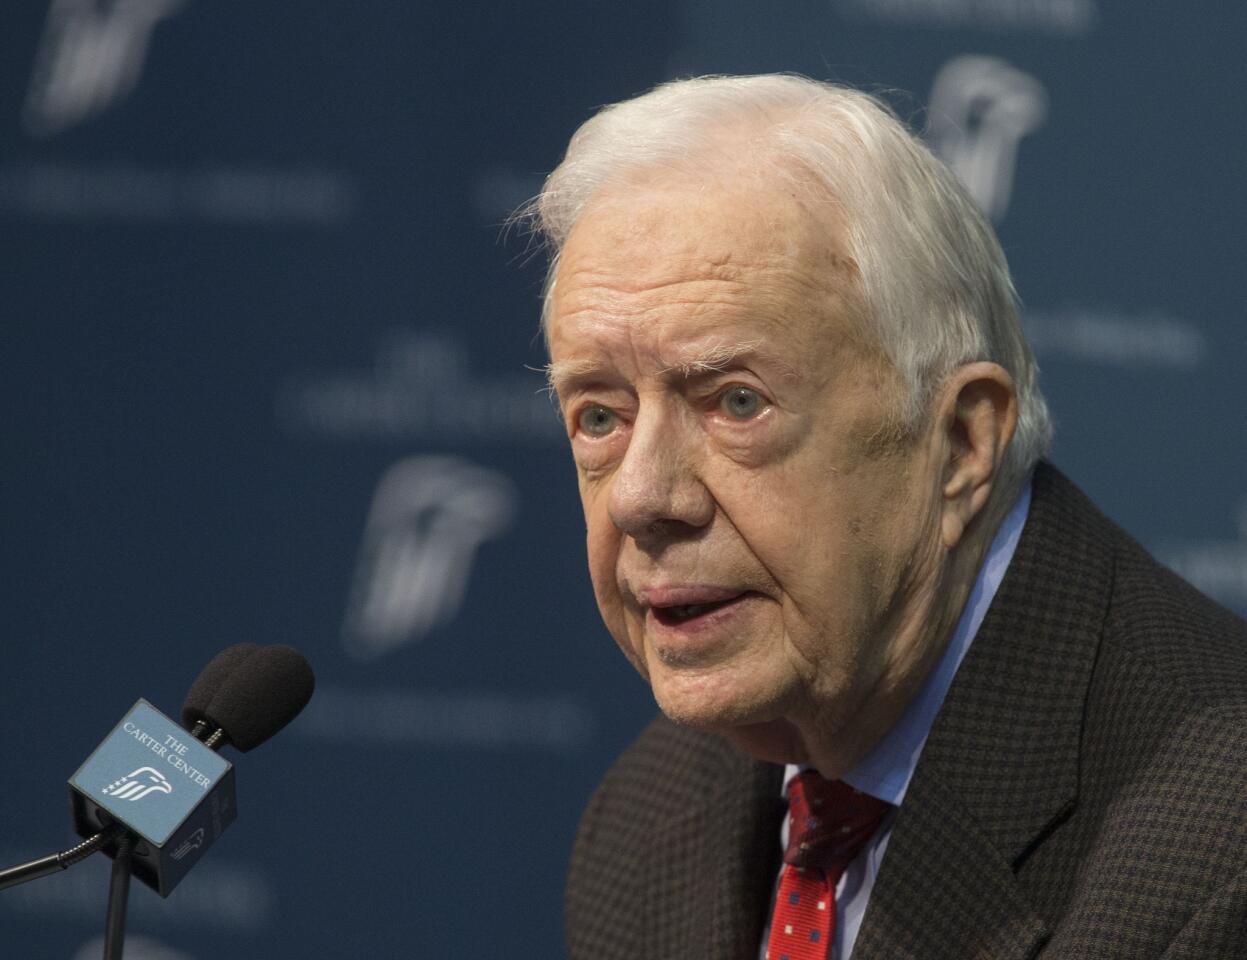 Former President Jimmy Carter talks about his cancer diagnosis during a news conference at the Carter Center in Atlanta on Aug. 20, 2015.